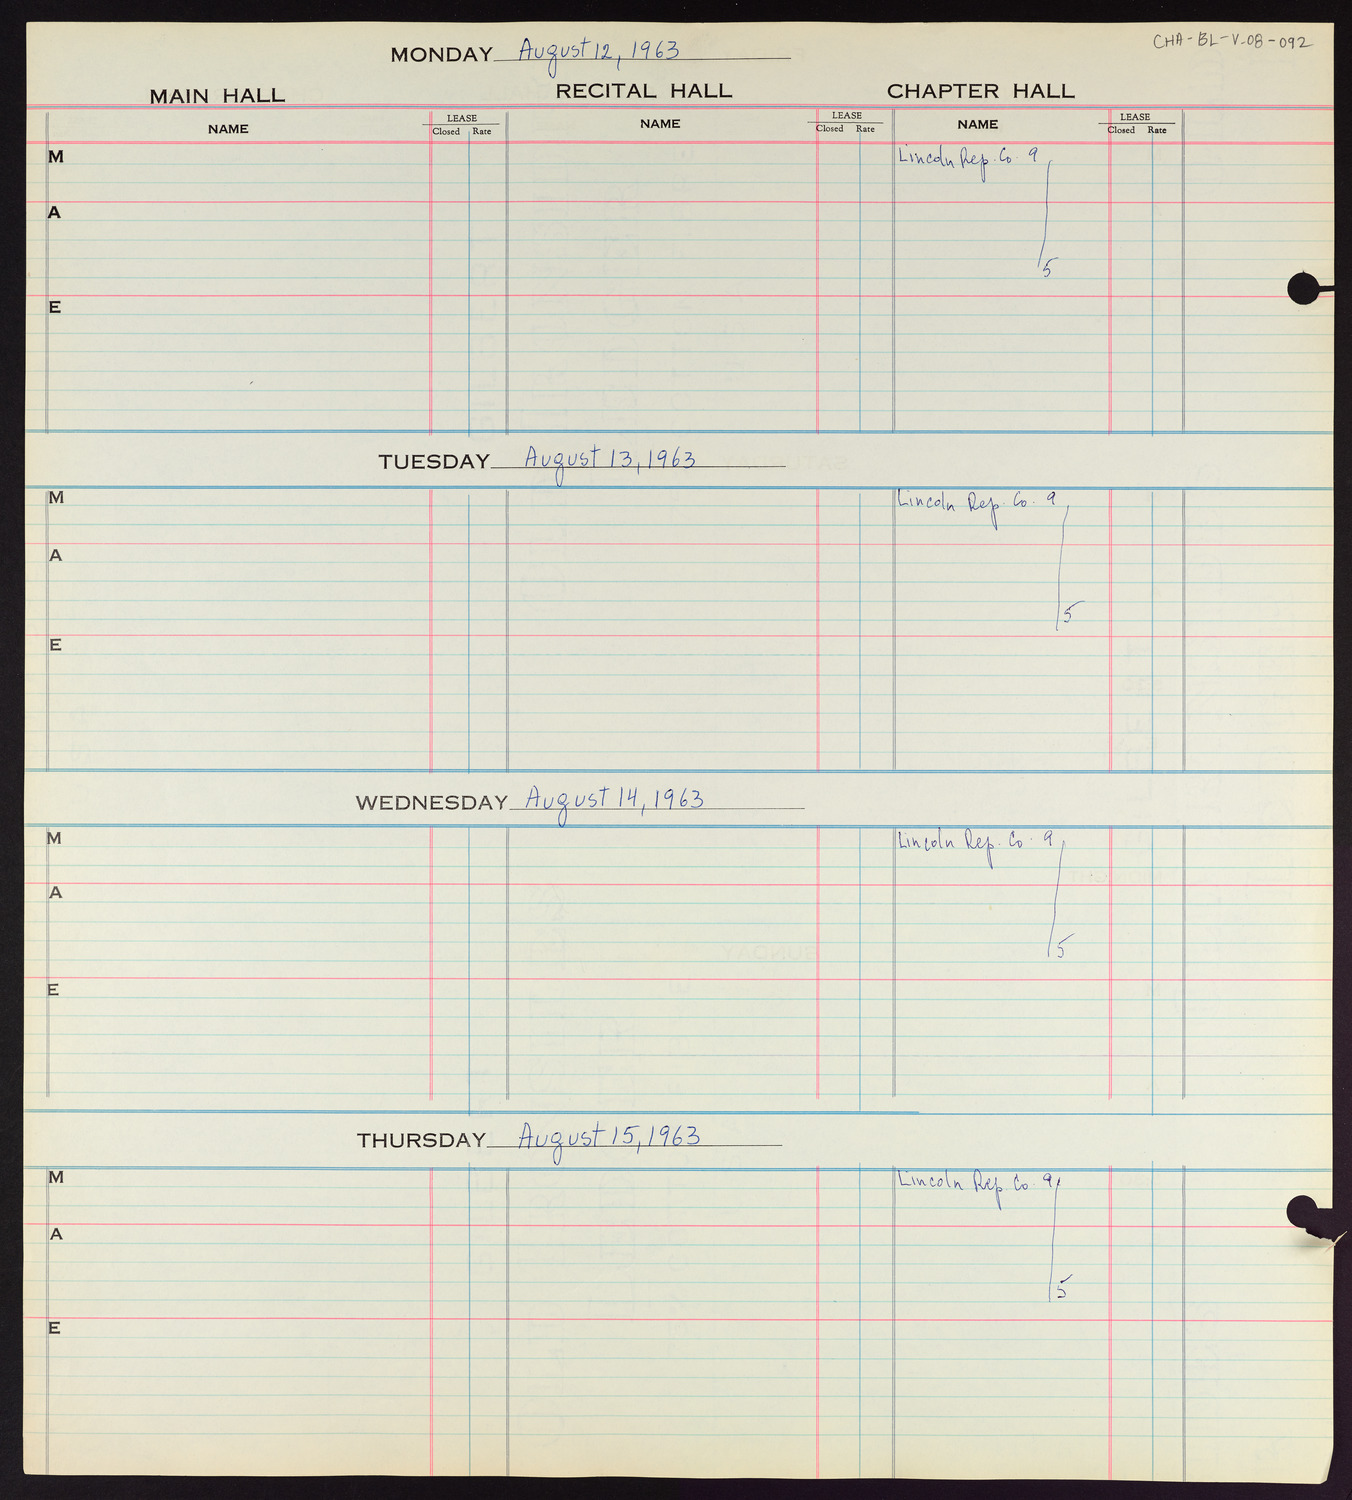 Carnegie Hall Booking Ledger, volume 8, page 92